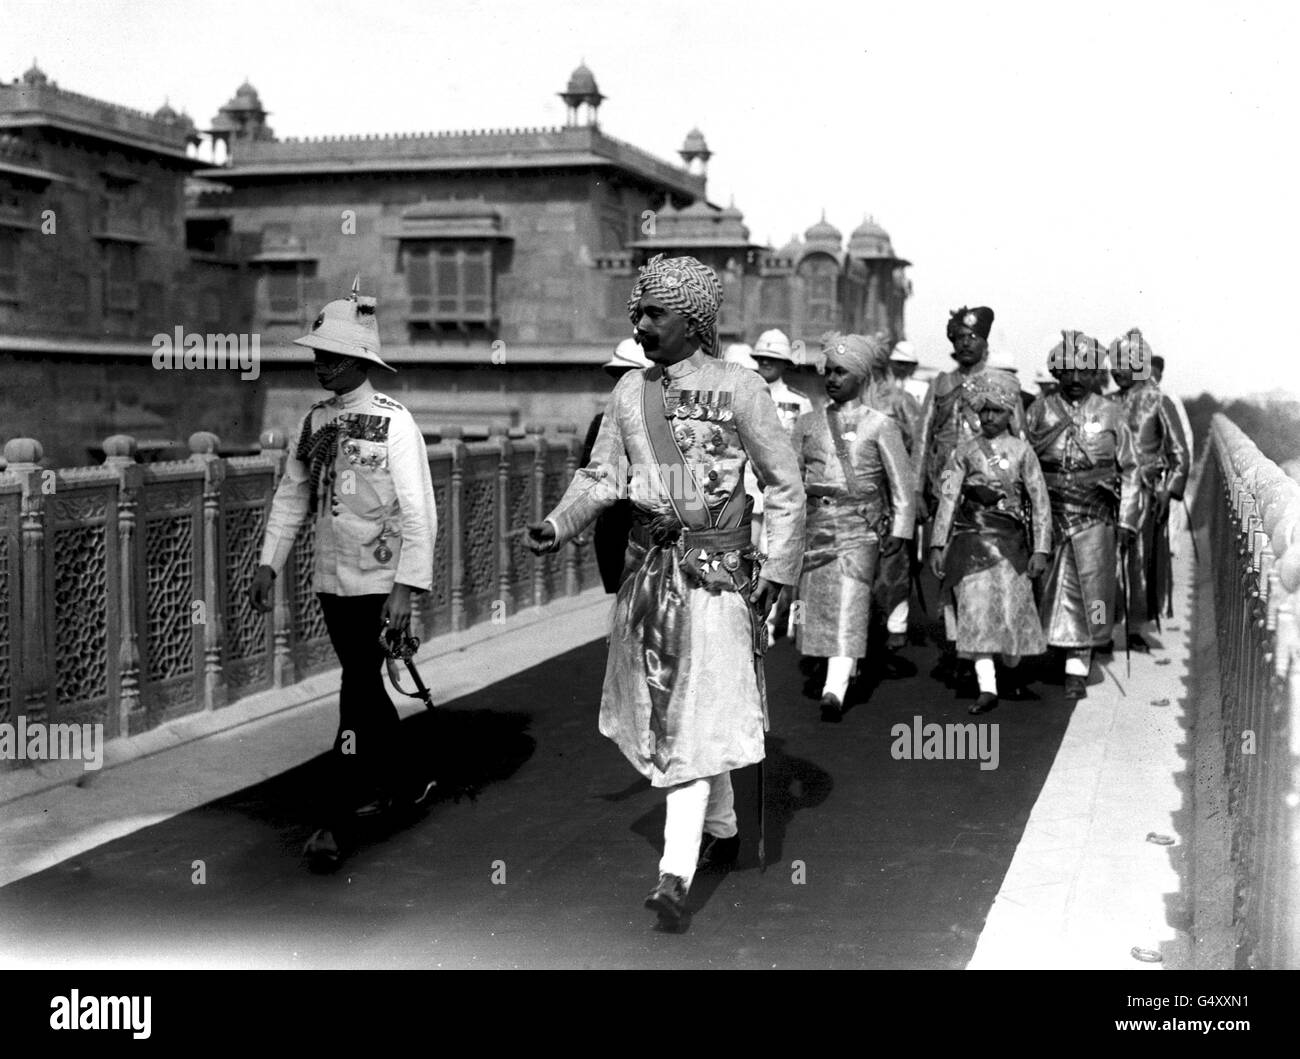 PA NEWS PHOTO 1921: THE BRITISH RAJ: The Prince of Wales' tour of Japan and India. The Prince of Wales, accompanied by the Maharajah of Bikaner, proceeding to the durbar hall in the Ganga Niwas fort after HRH's arrival. Stock Photo